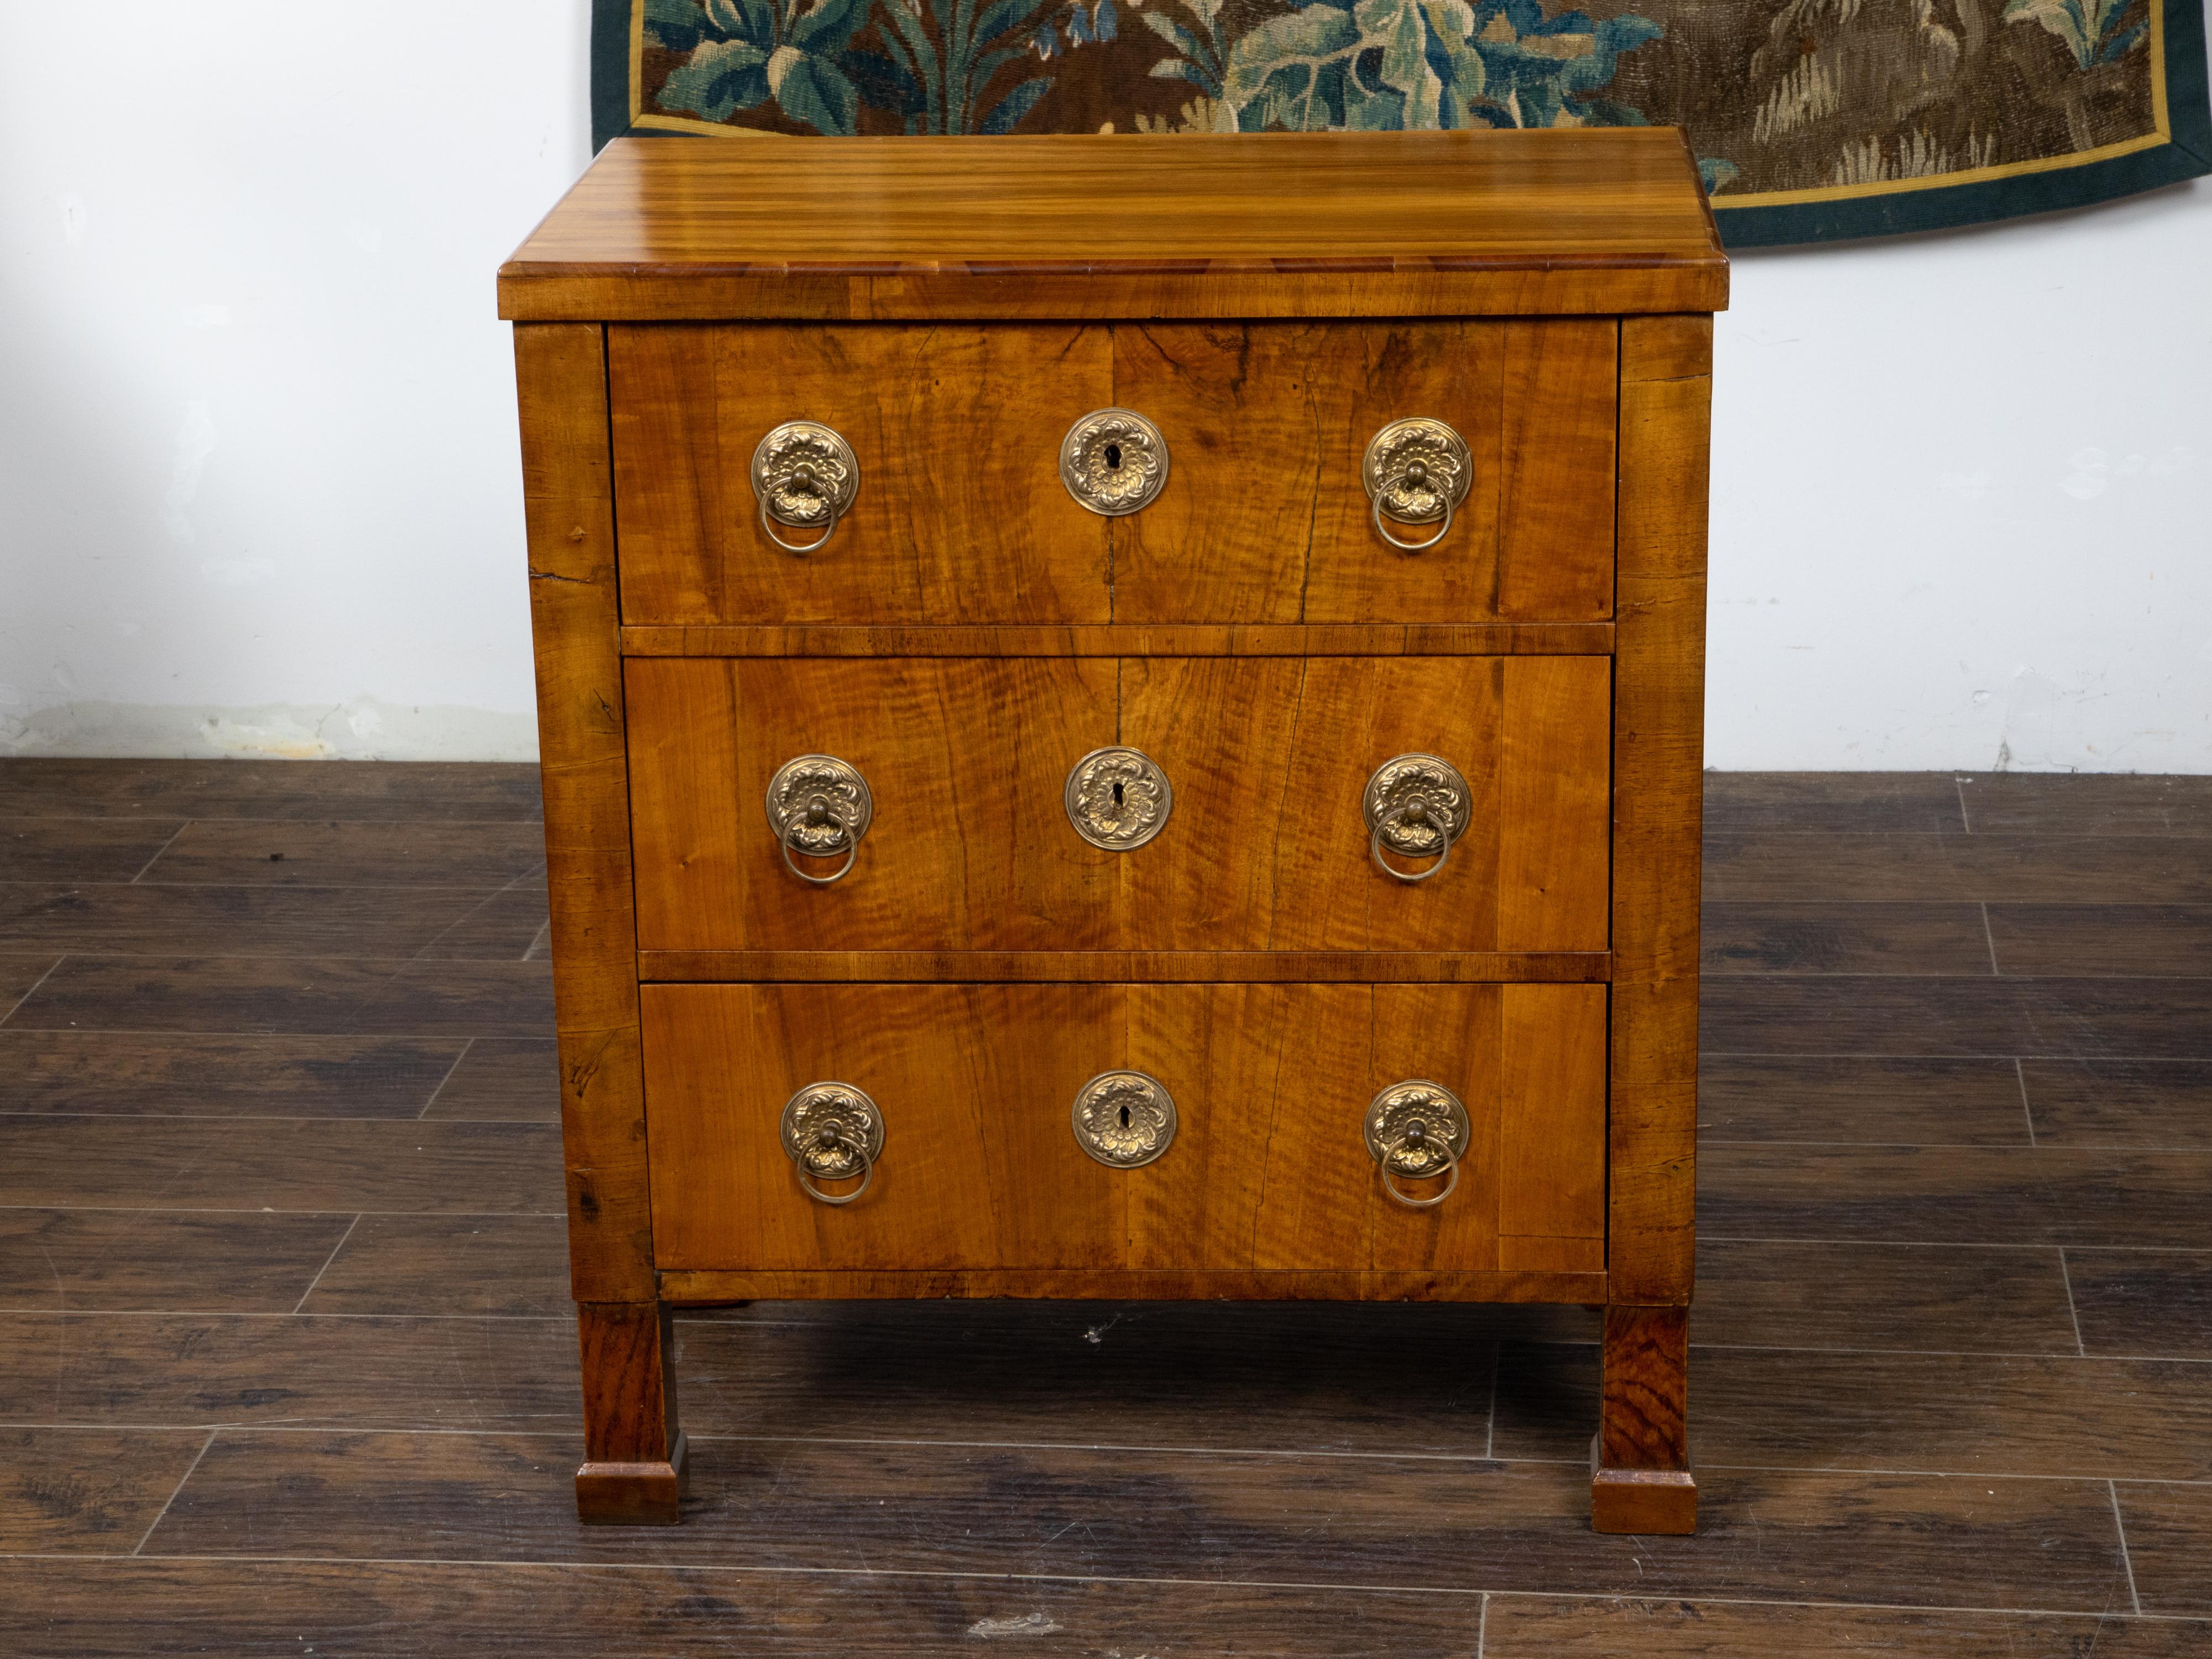 An Austrian Biedermeier period walnut veneered commode from the Mid-19th Century, with three drawers, butterfly veneer, ornate brass hardware and front block feet. Created in Austria during the second quarter of the 19th century, this walnut